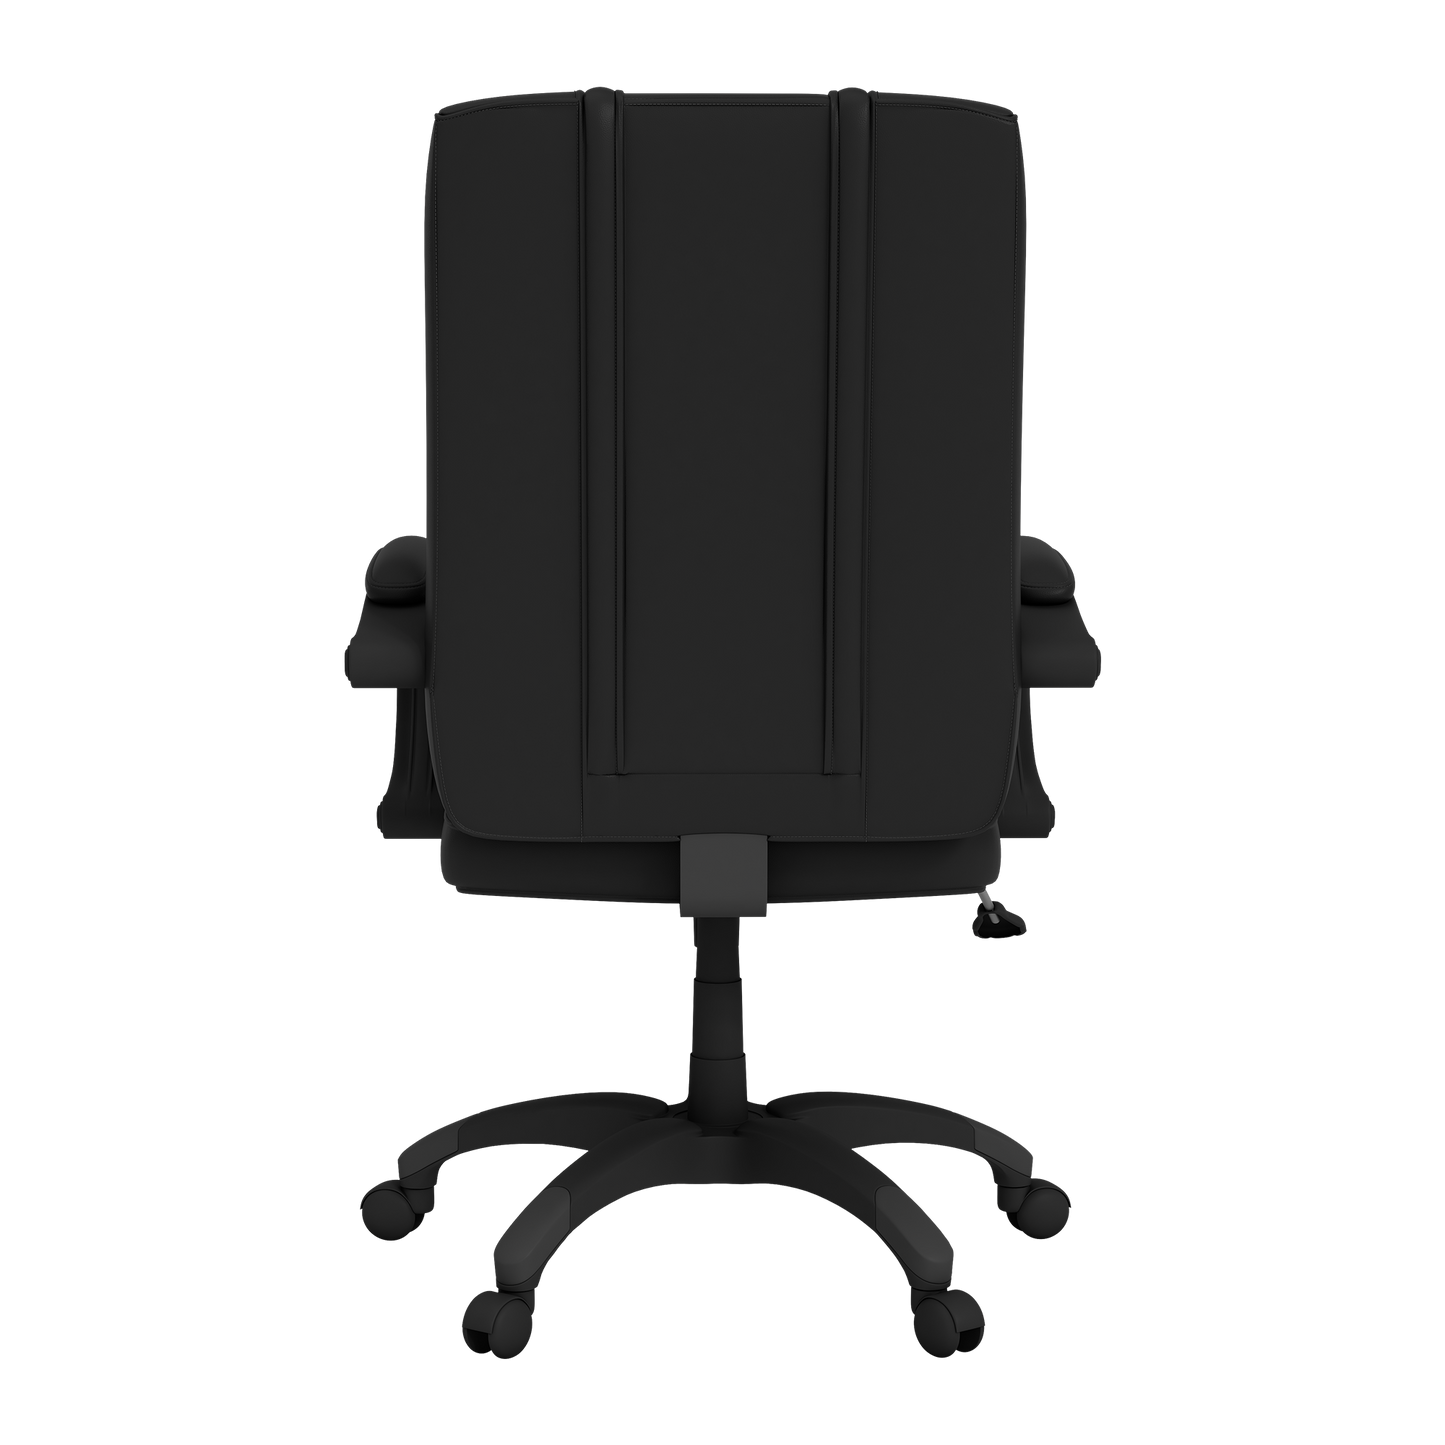 Office Chair 1000 with Georgia State University Primary Logo